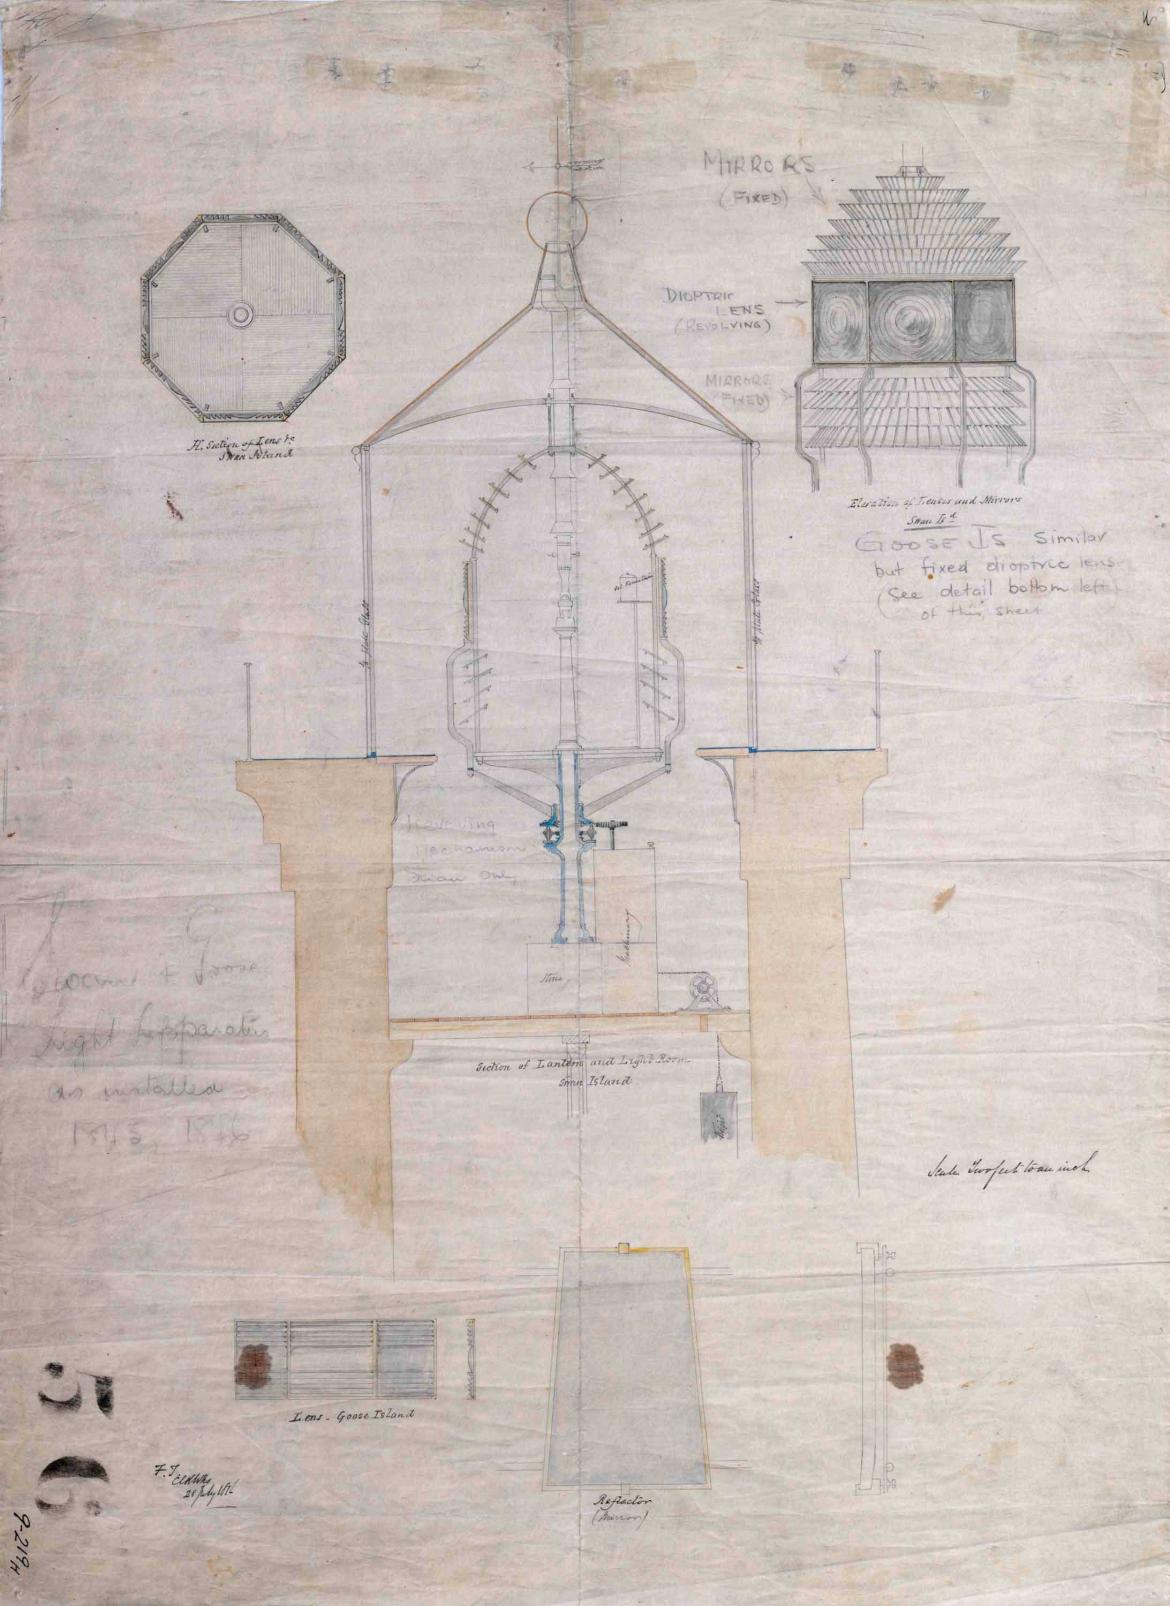 Figure 13. Swan Island Lighthouse - Light Apparatus as Installed 1845/1846. Image courtesy of the National Archives of Australia. NAA: A9568, 5/9/3 (© Commonwealth of Australia, National Archives of Australia) 18